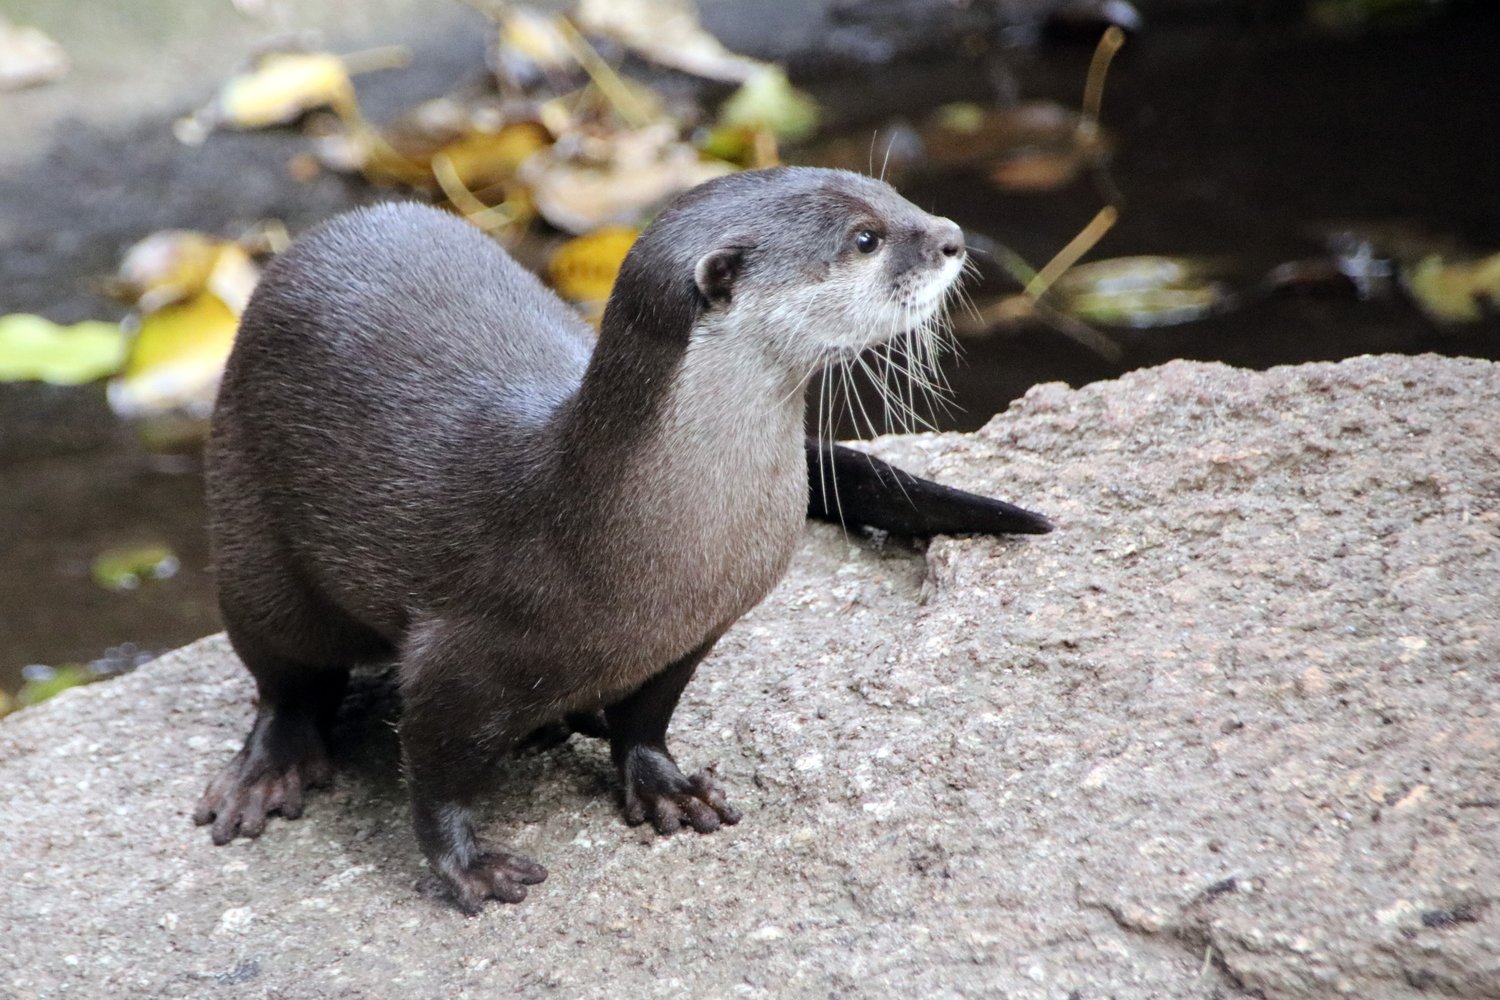 Otterly adorable. This otter lives in Australia, but even the Upper Delaware River has otters.